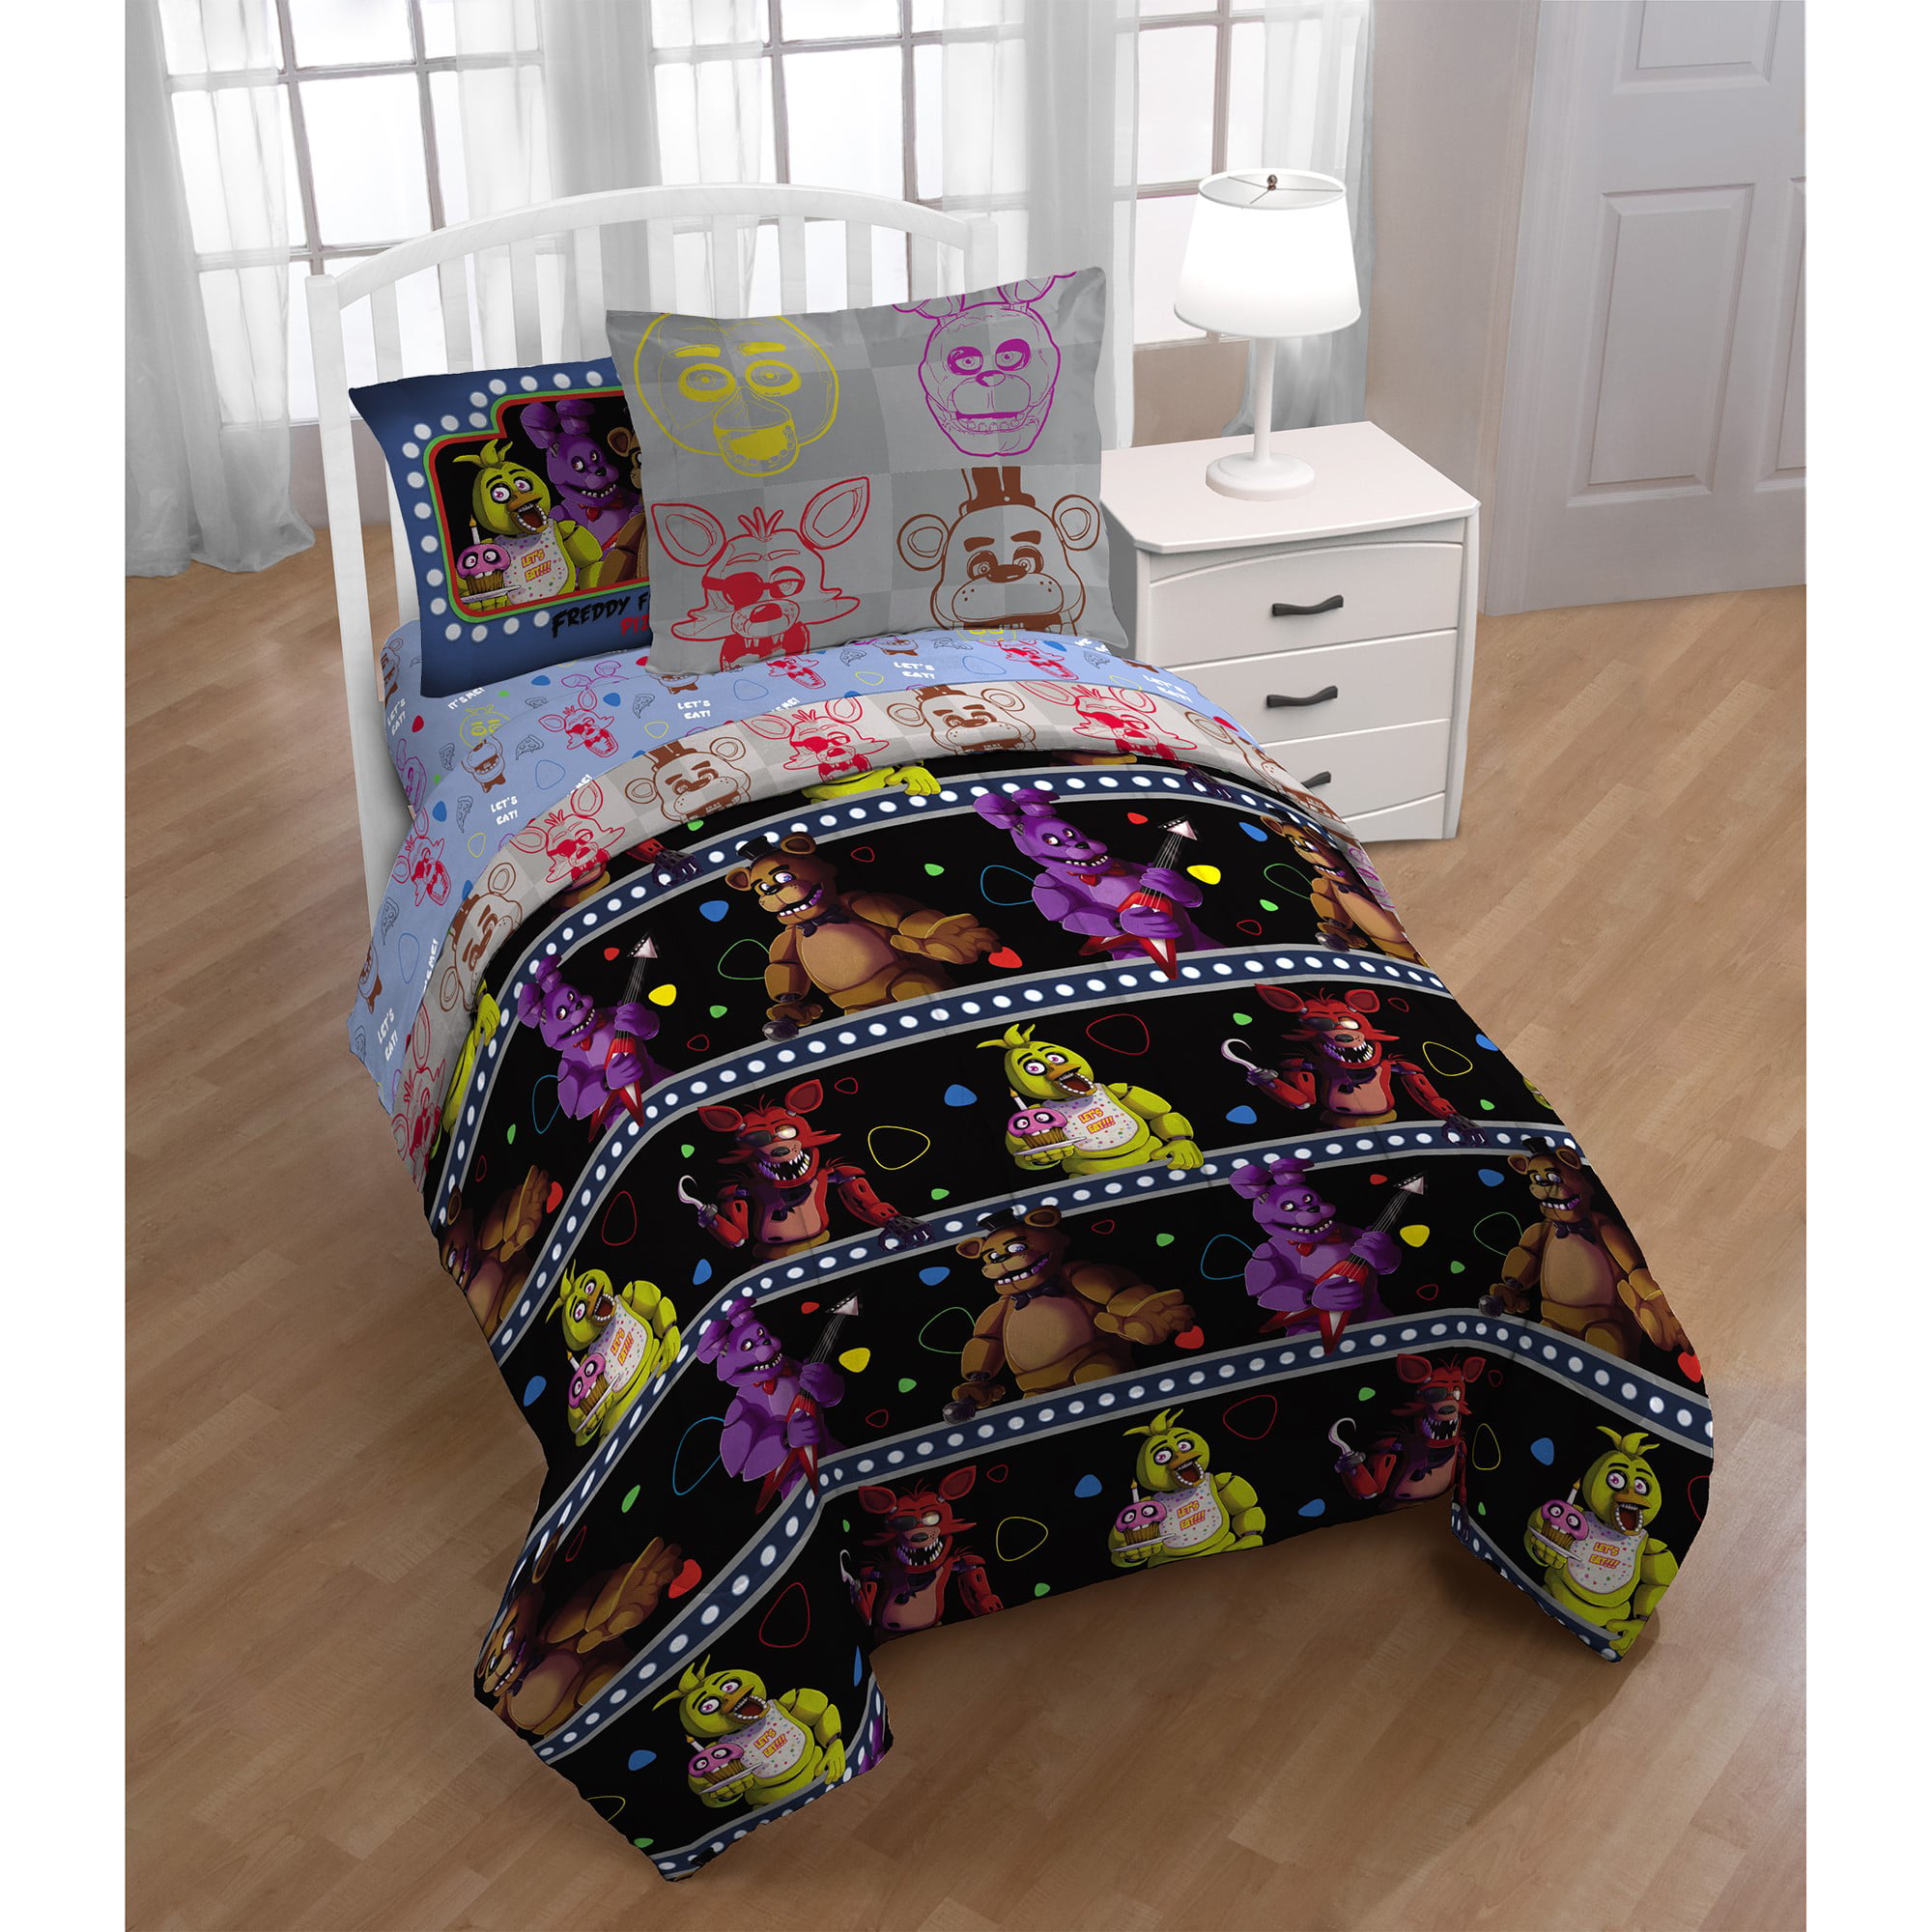 Five Nights at Freddy's Bedding Set Twin Bed in a Bag with Bonus Tote, 5  Piece